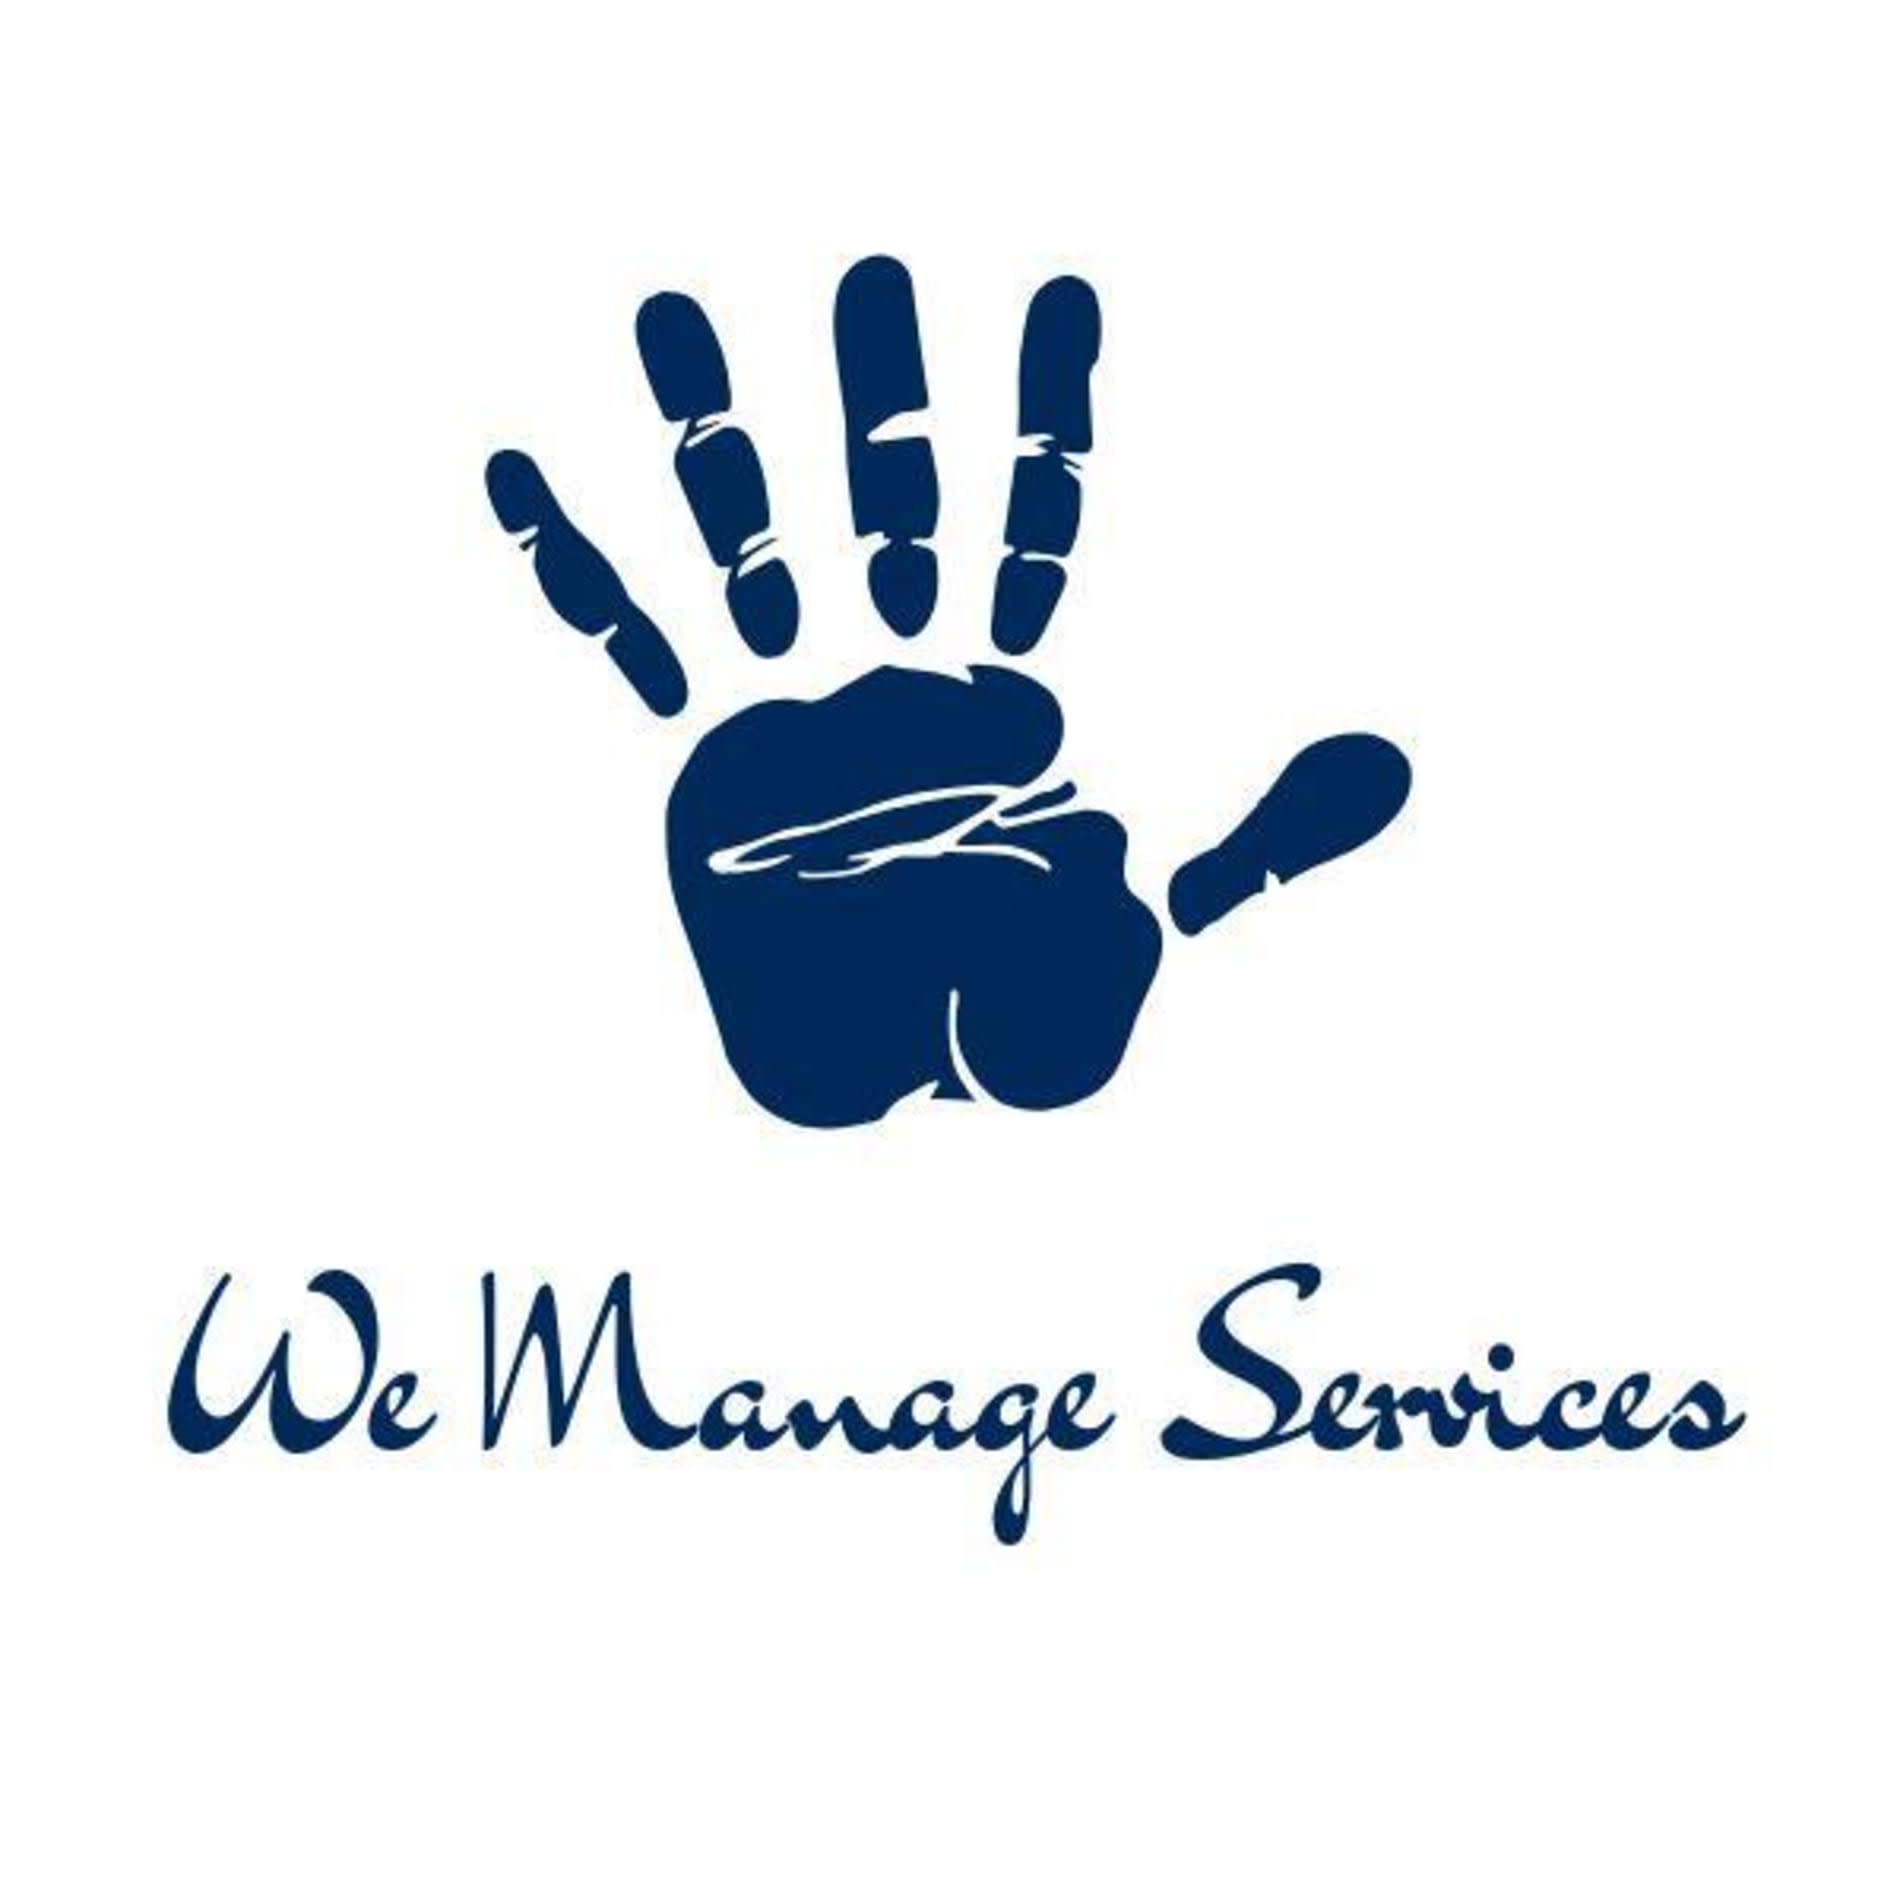 We Manage Services